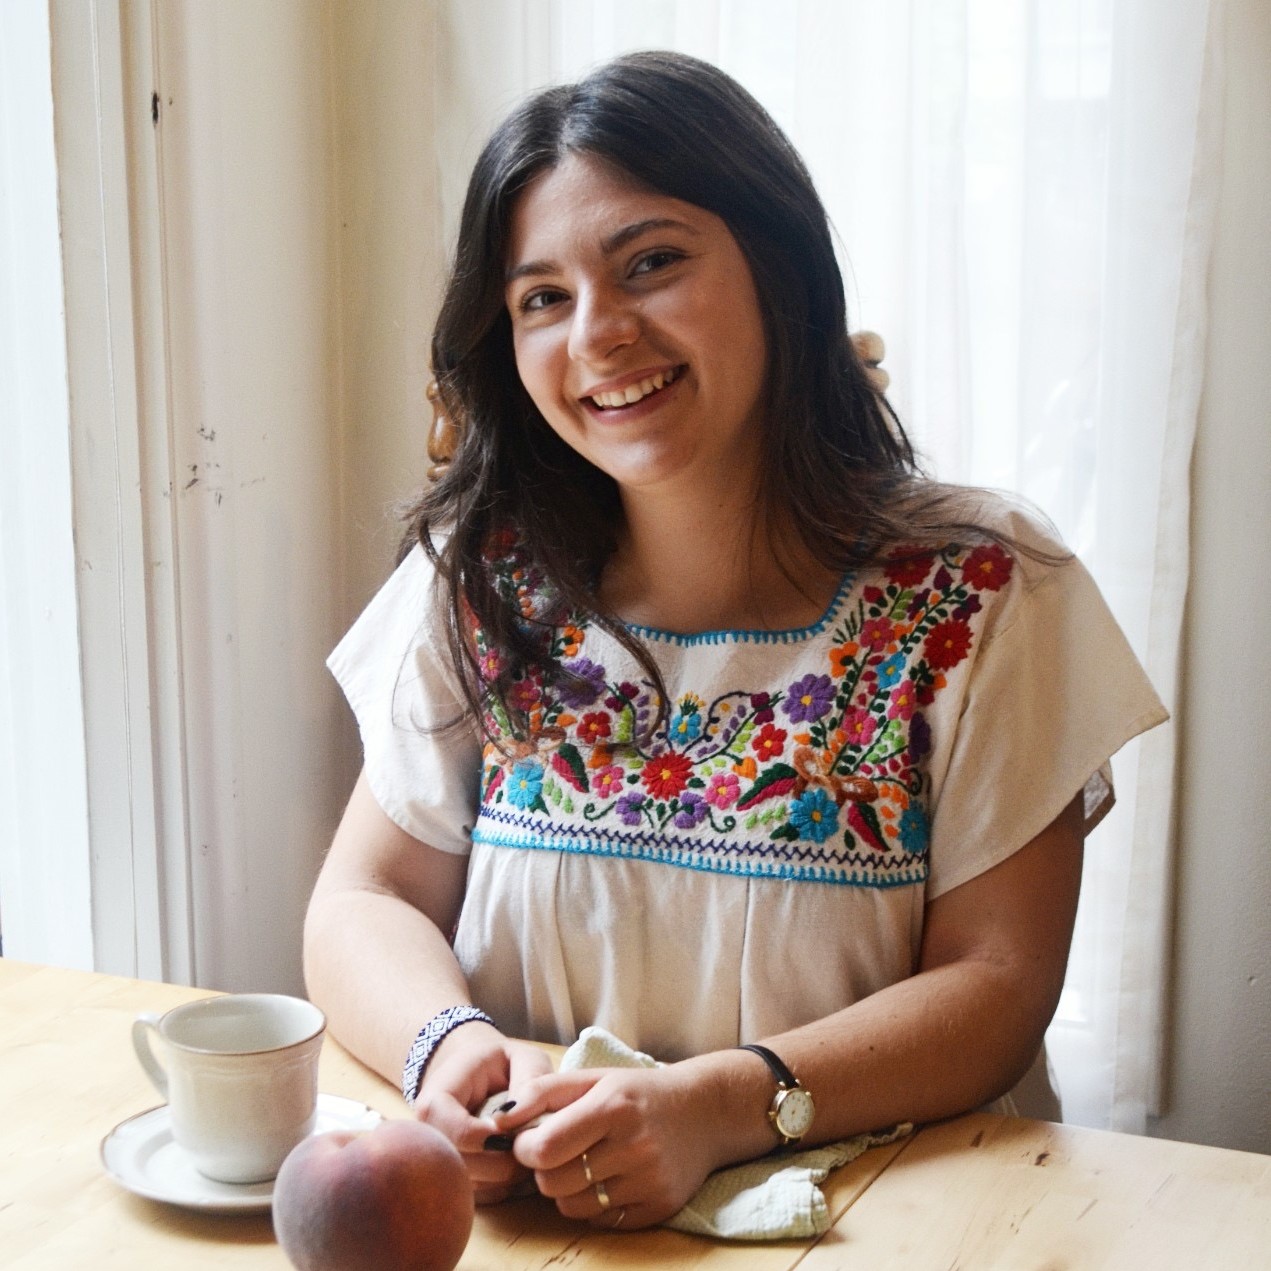 Serafima wearing an embroidered top sitting in soft natural light at a table with a coffee cup and a peach